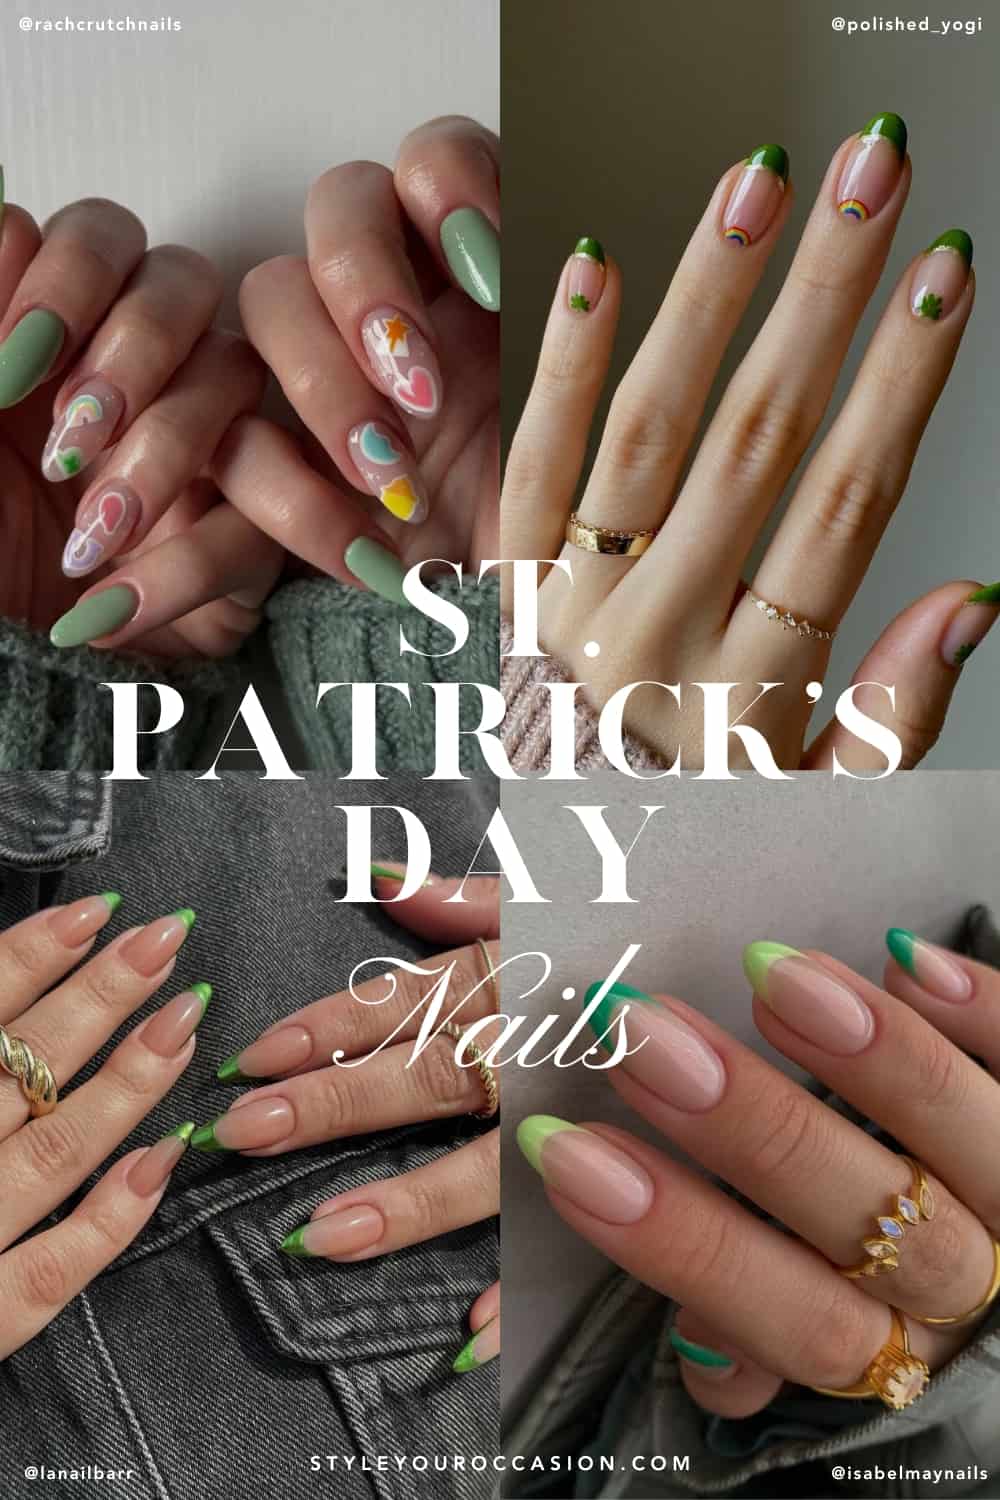 collage of four hands with simple St. Patricks day nails designs